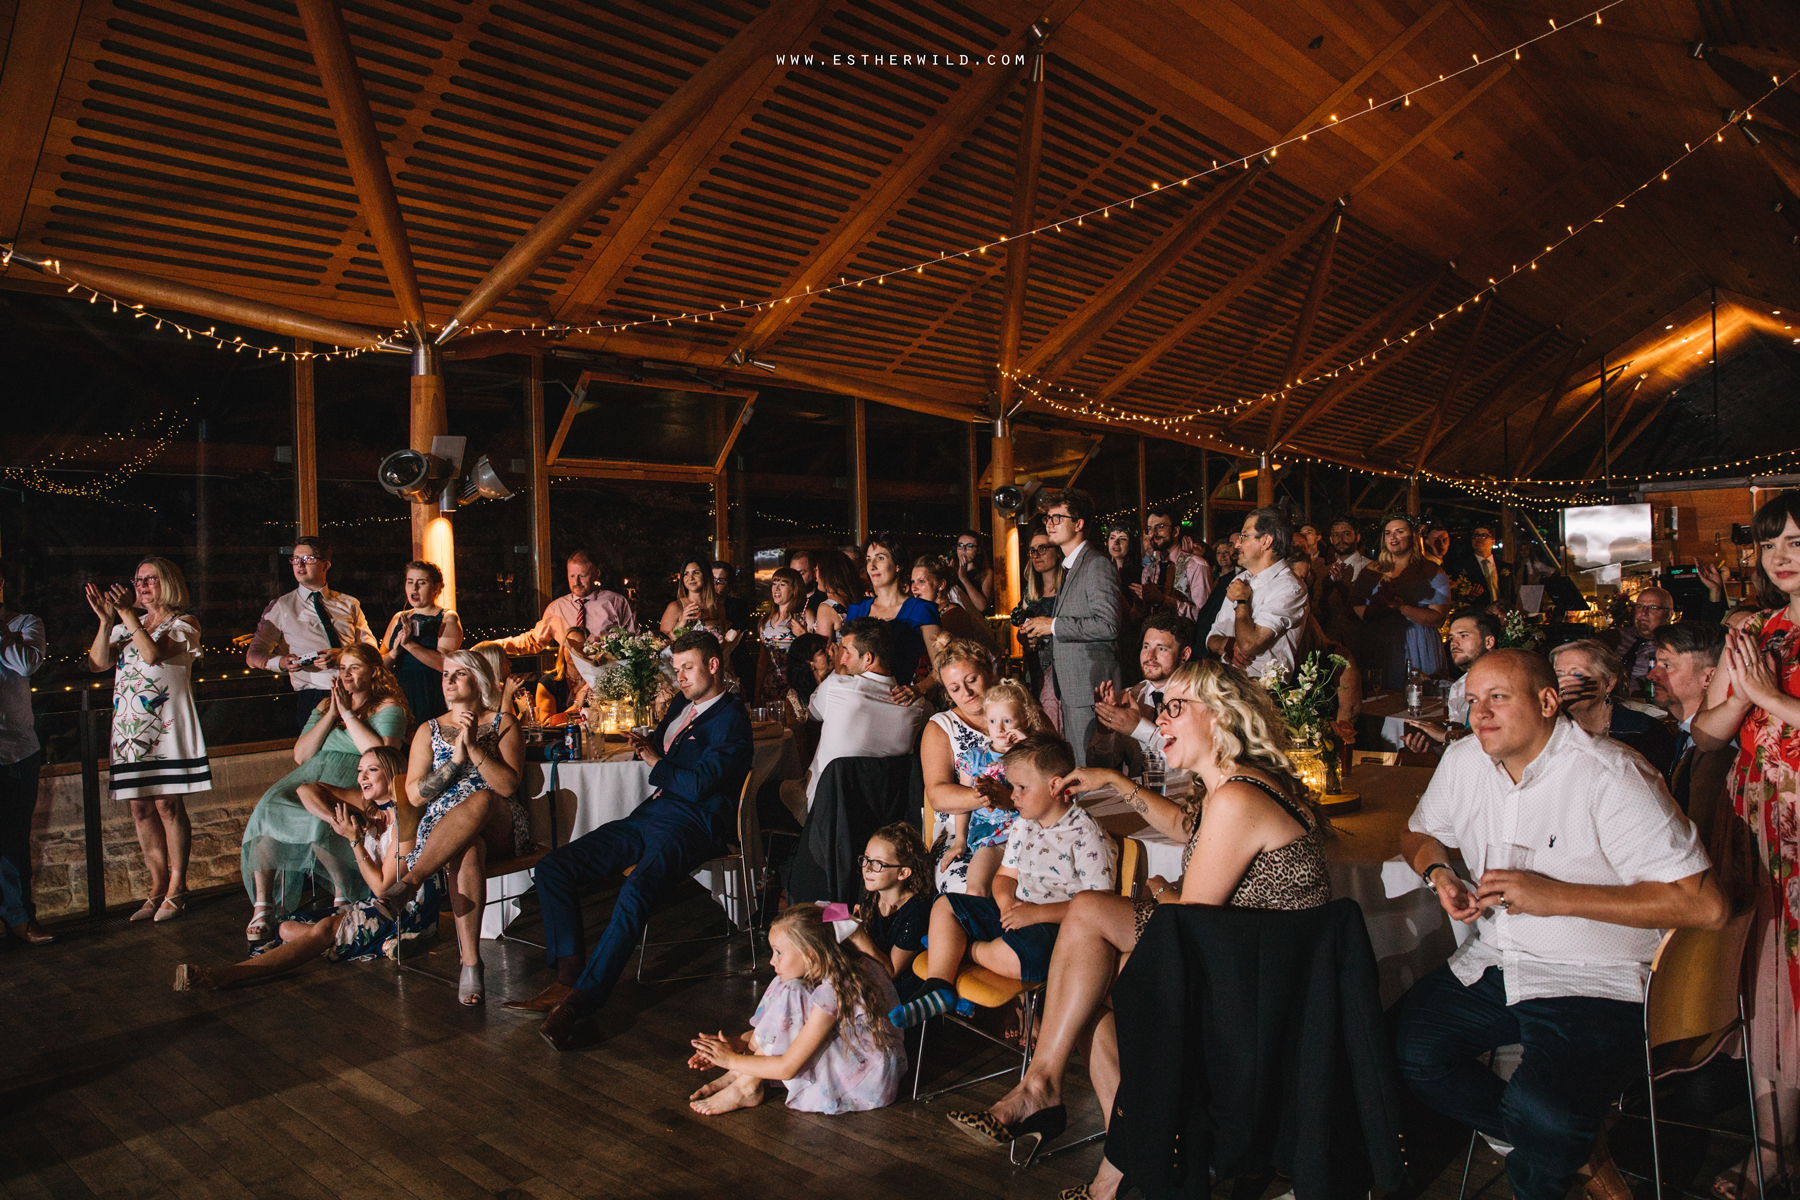 Norwich_Castle_Arcade_Grosvenor_Chip_Birdcage_Cathedral_Cloisters_Refectory_Wedding_Photography_Esther_Wild_Photographer_Norfolk_Kings_Lynn_3R8A3305.jpg